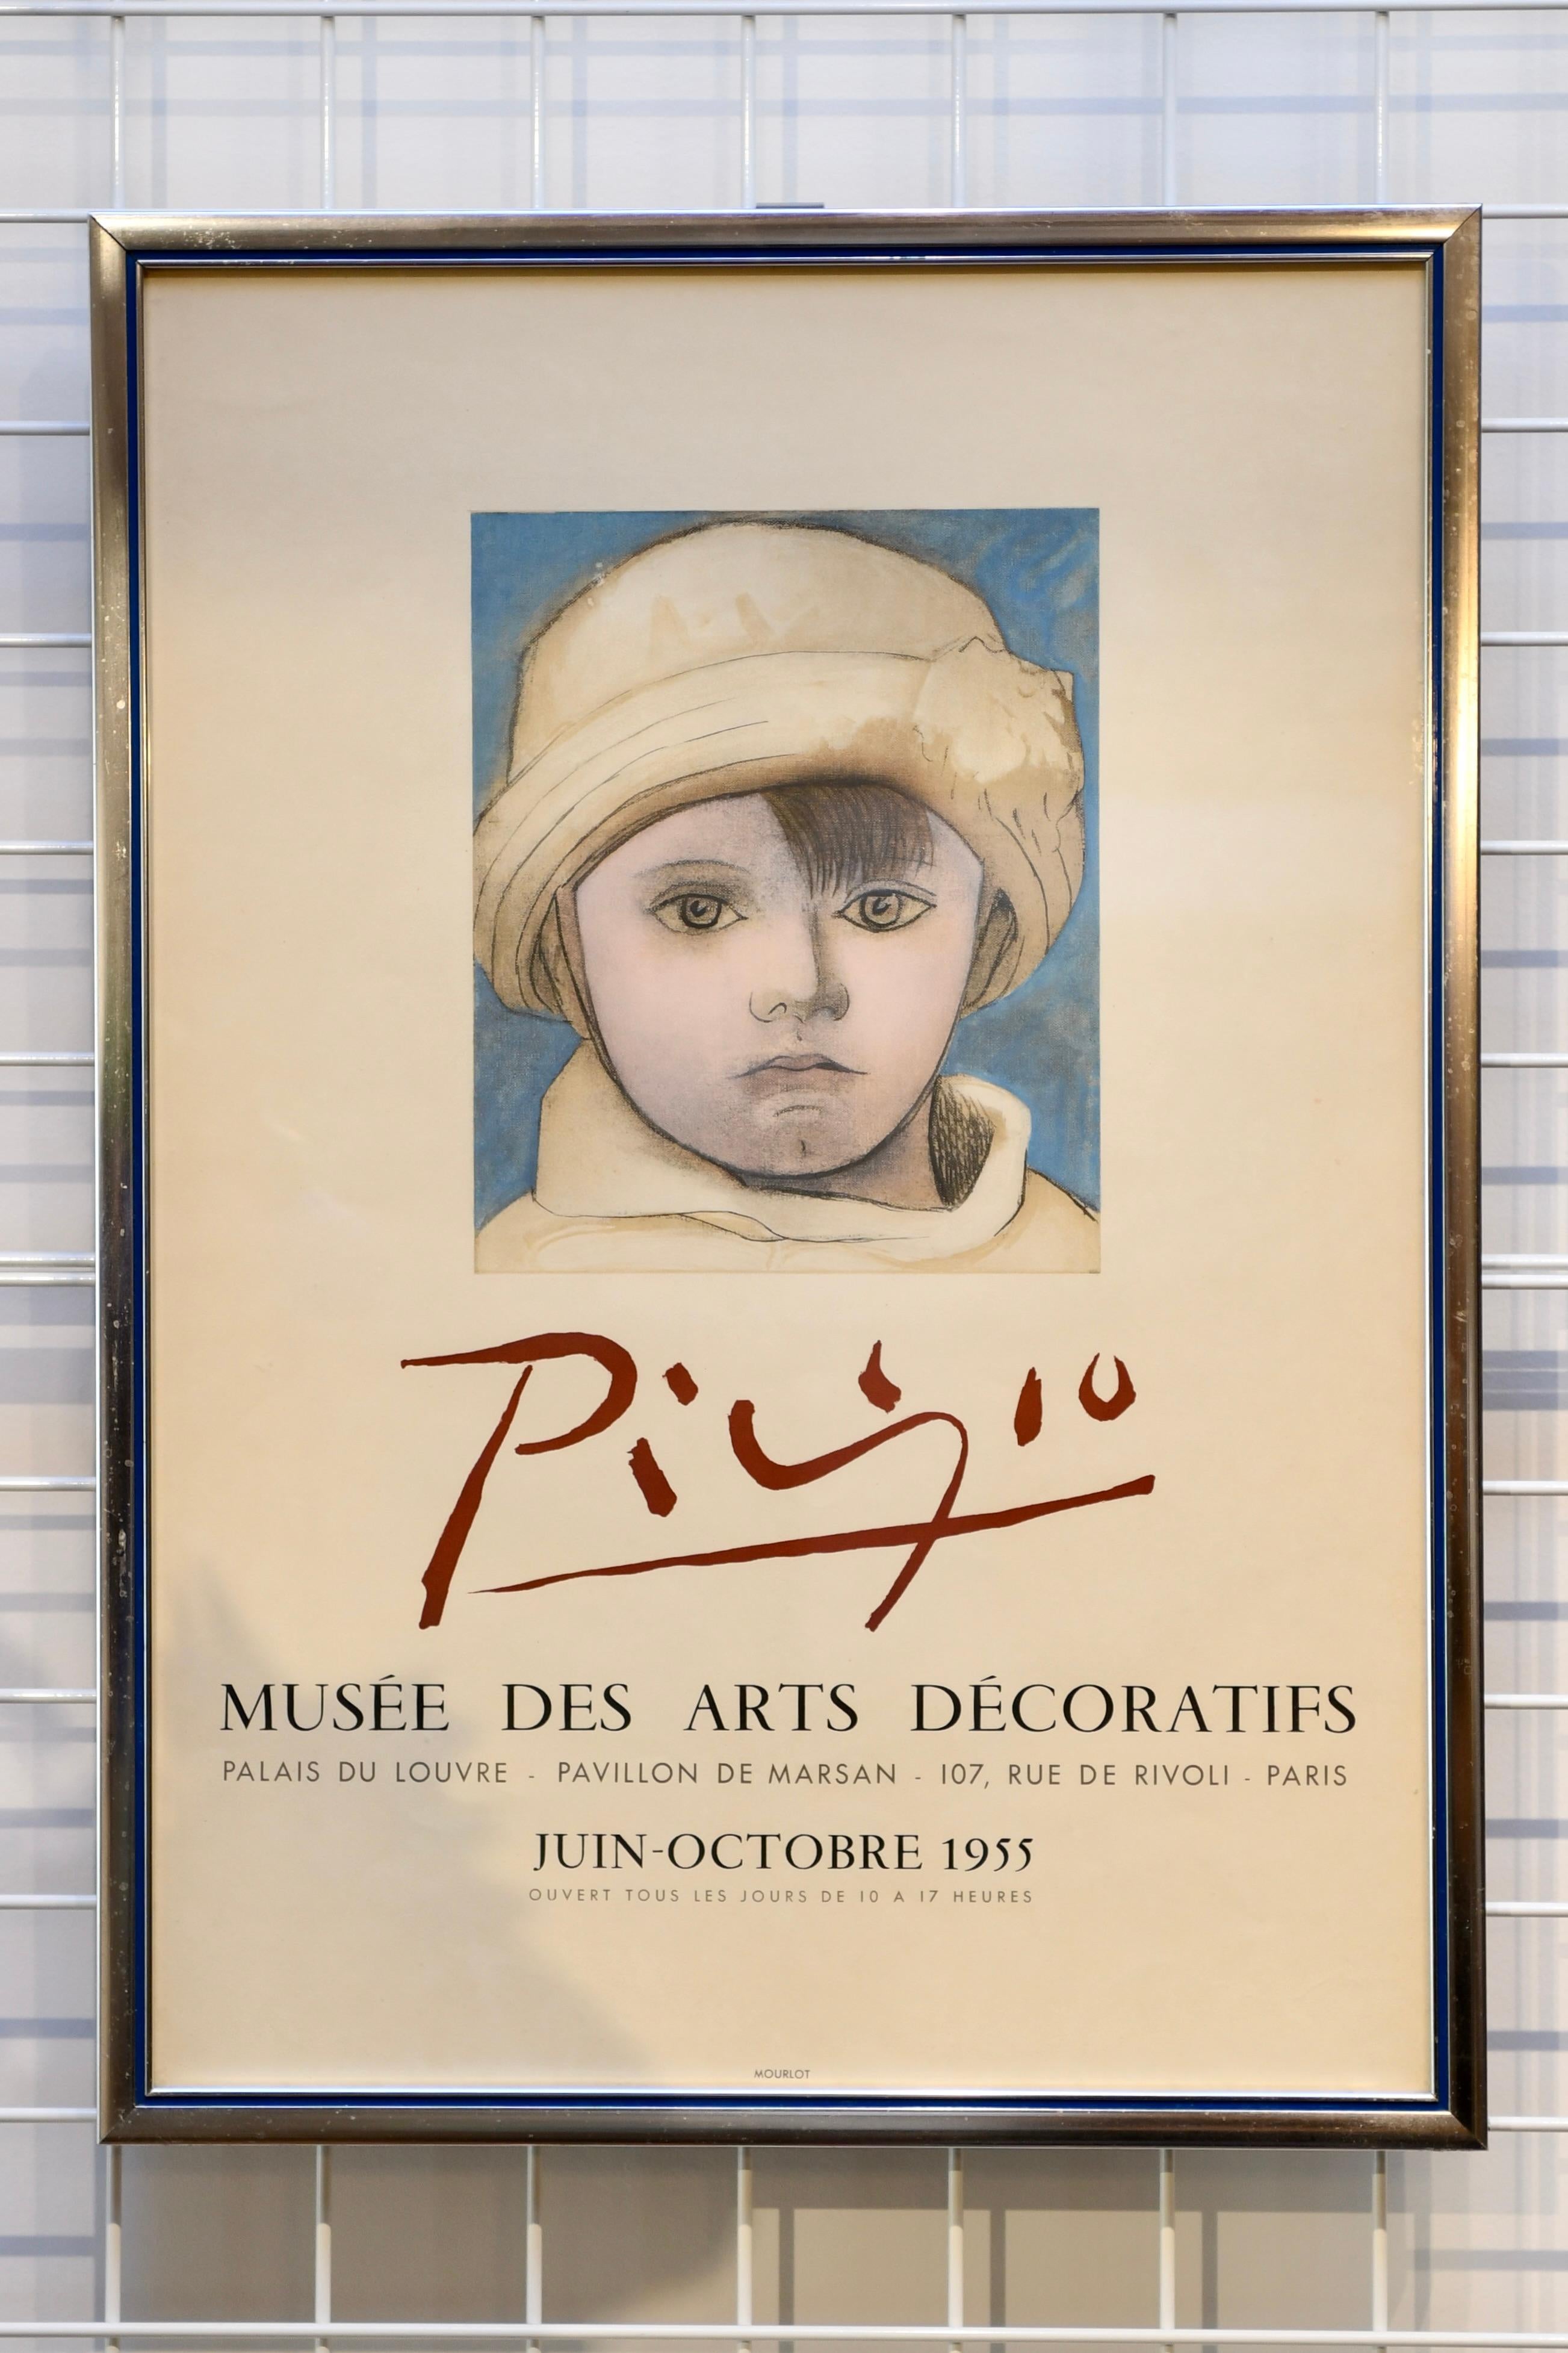 1955 Musee des Arts Decoratifs Picasso exhibition poster. Printed by Mourlot. Dimensions: 27.25